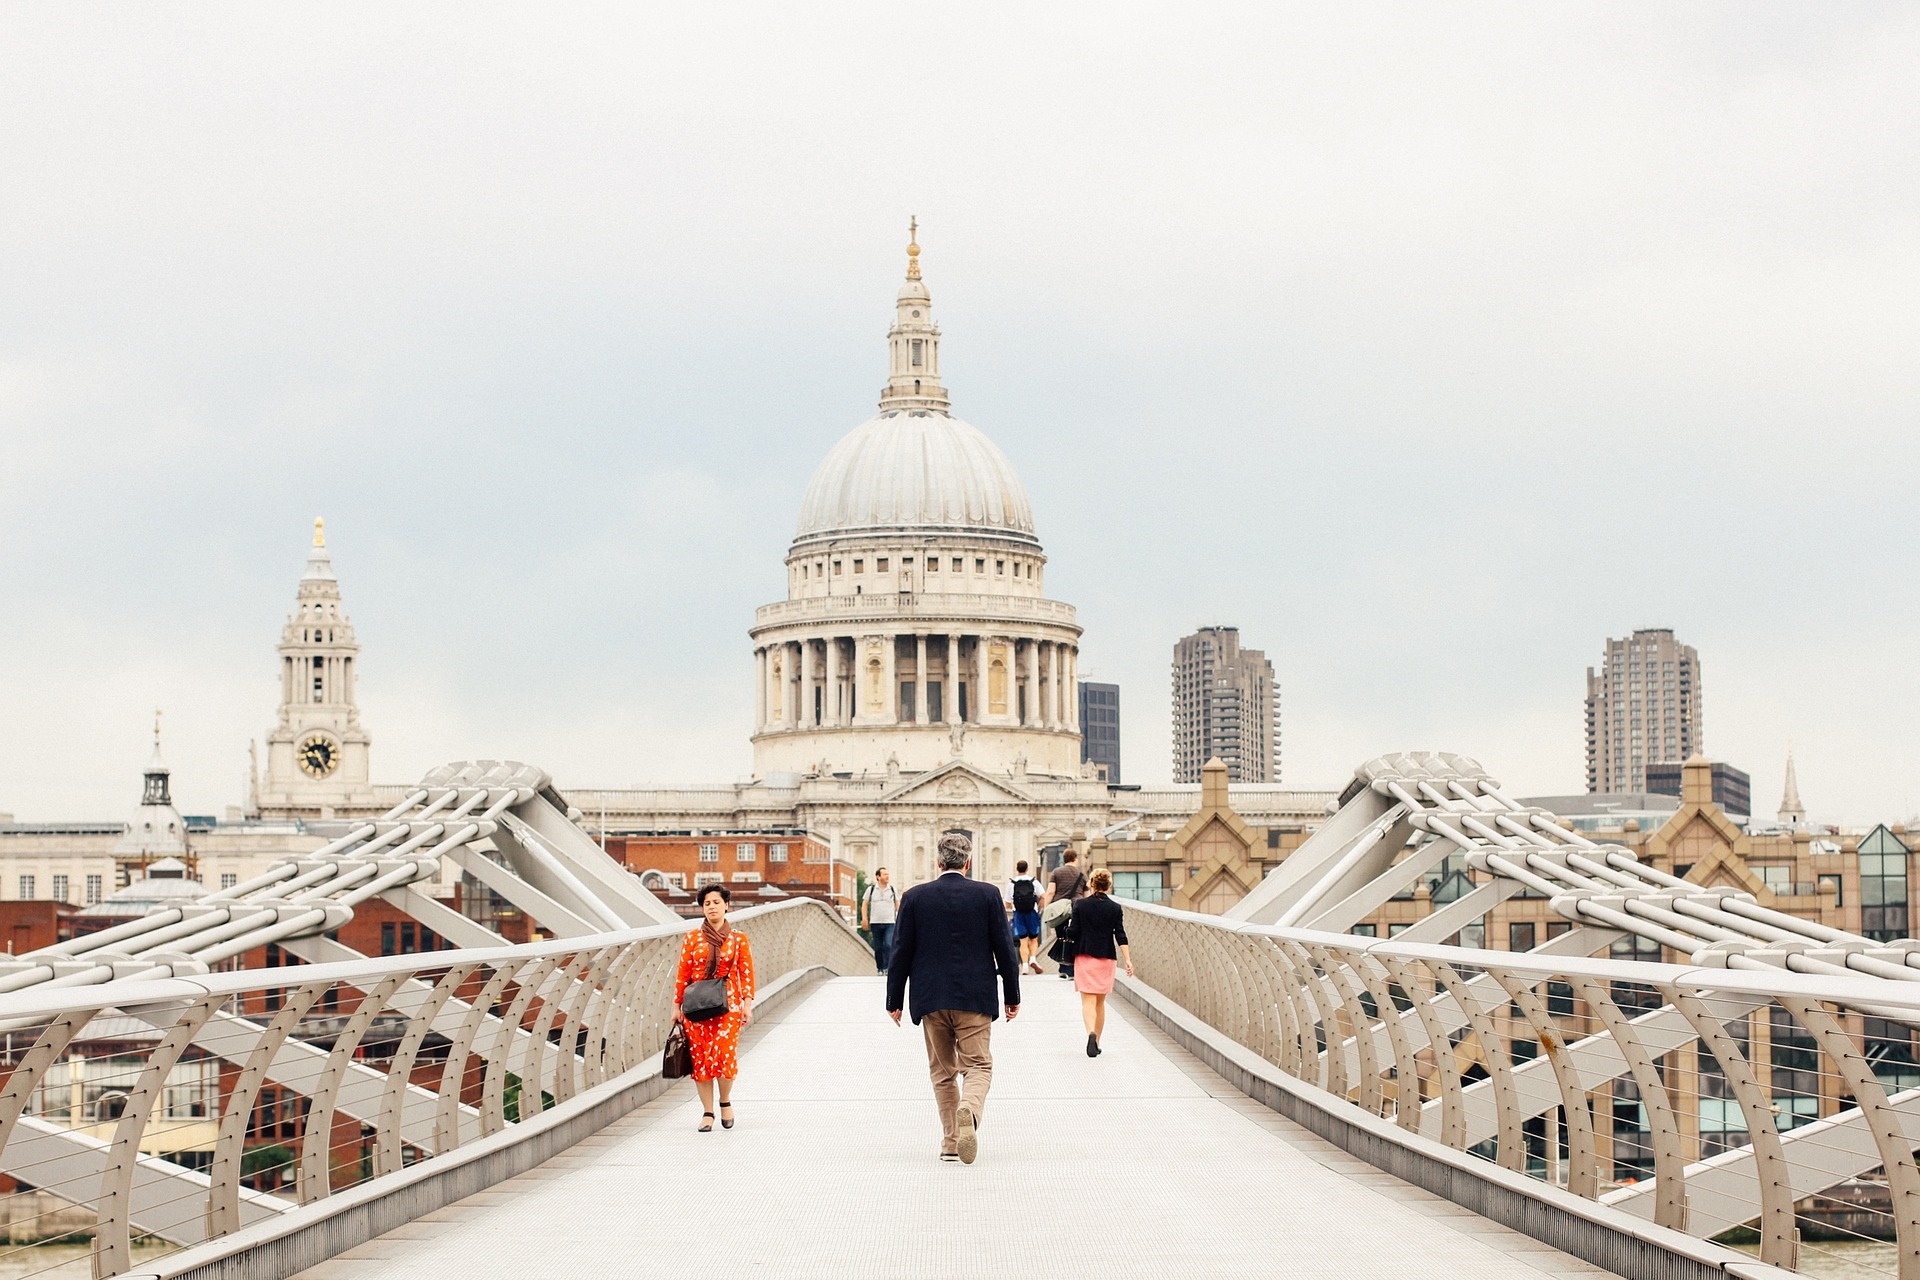 Top sights in Central London - St Pauls Cathedral & Millenium Bridge